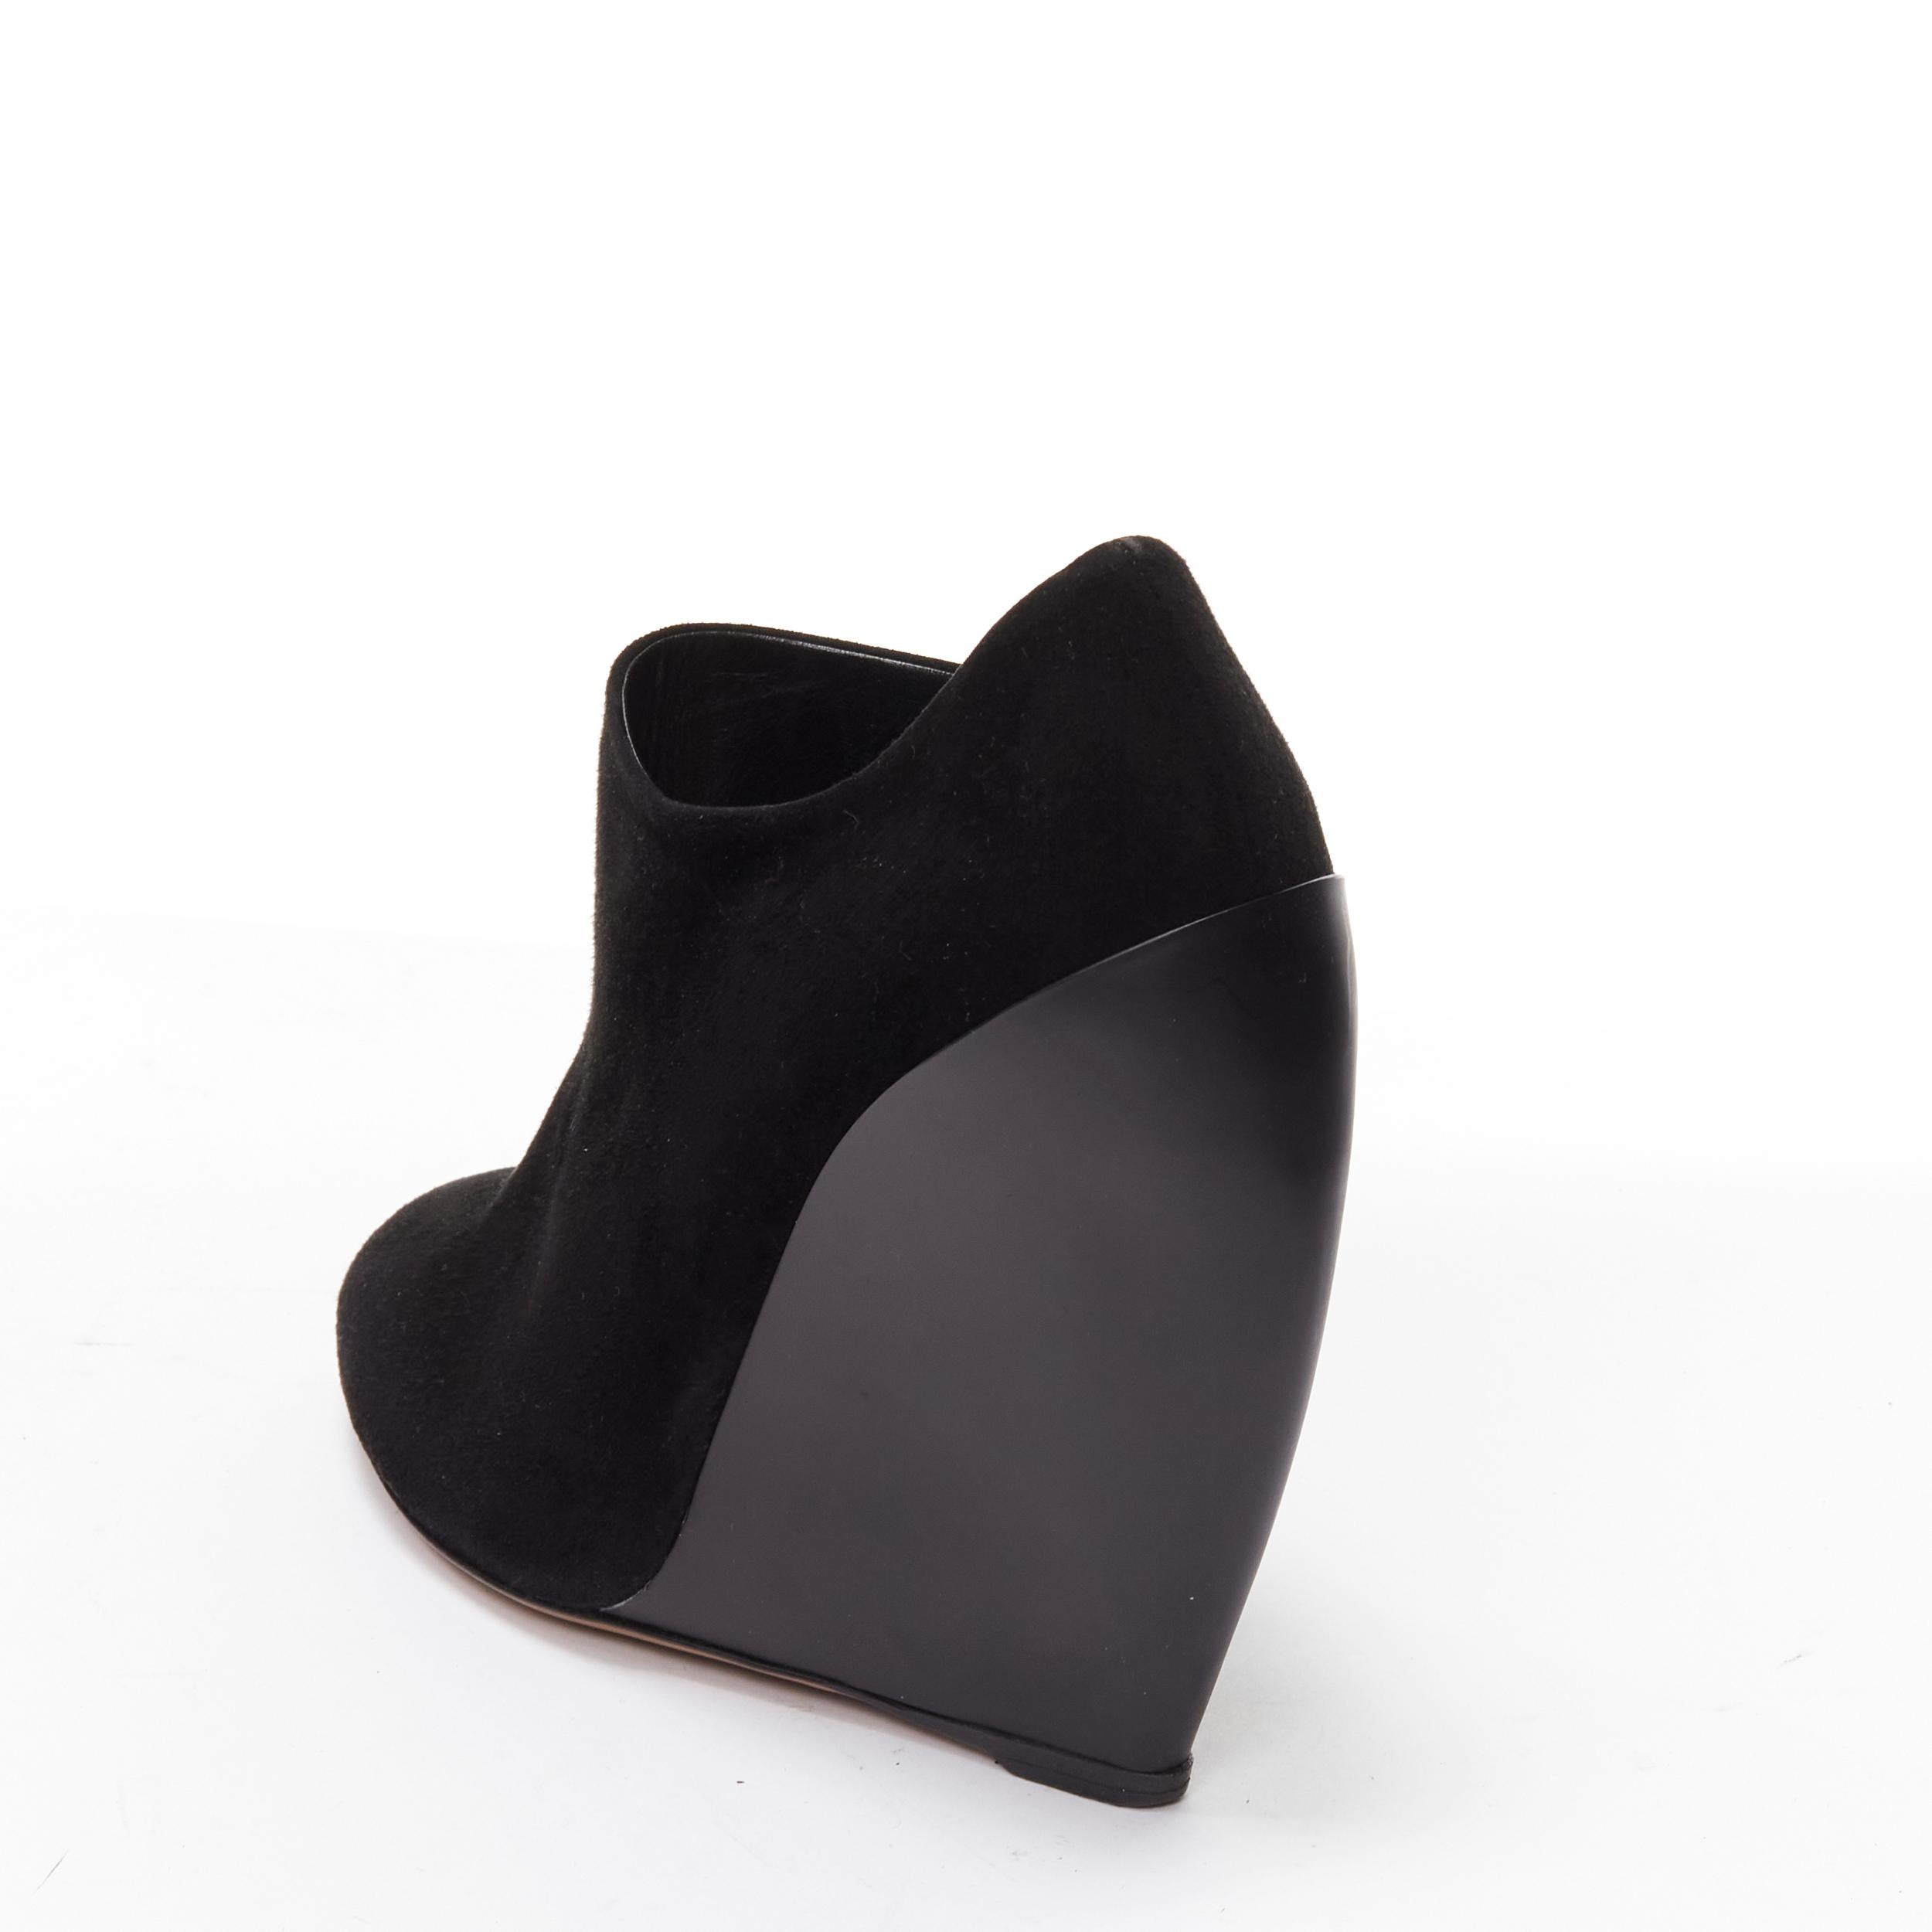 AZZEDINE ALAIA black suede curved wedge round toe ankle bootie EU37
Reference: LNKO/A02105
Brand: Alaia
Designer: Azzedine Alaia
Material: Suede
Color: Black
Pattern: Solid
Closure: Zip
Lining: Leather
Extra Details: Zip with ALAIA logo on the inner